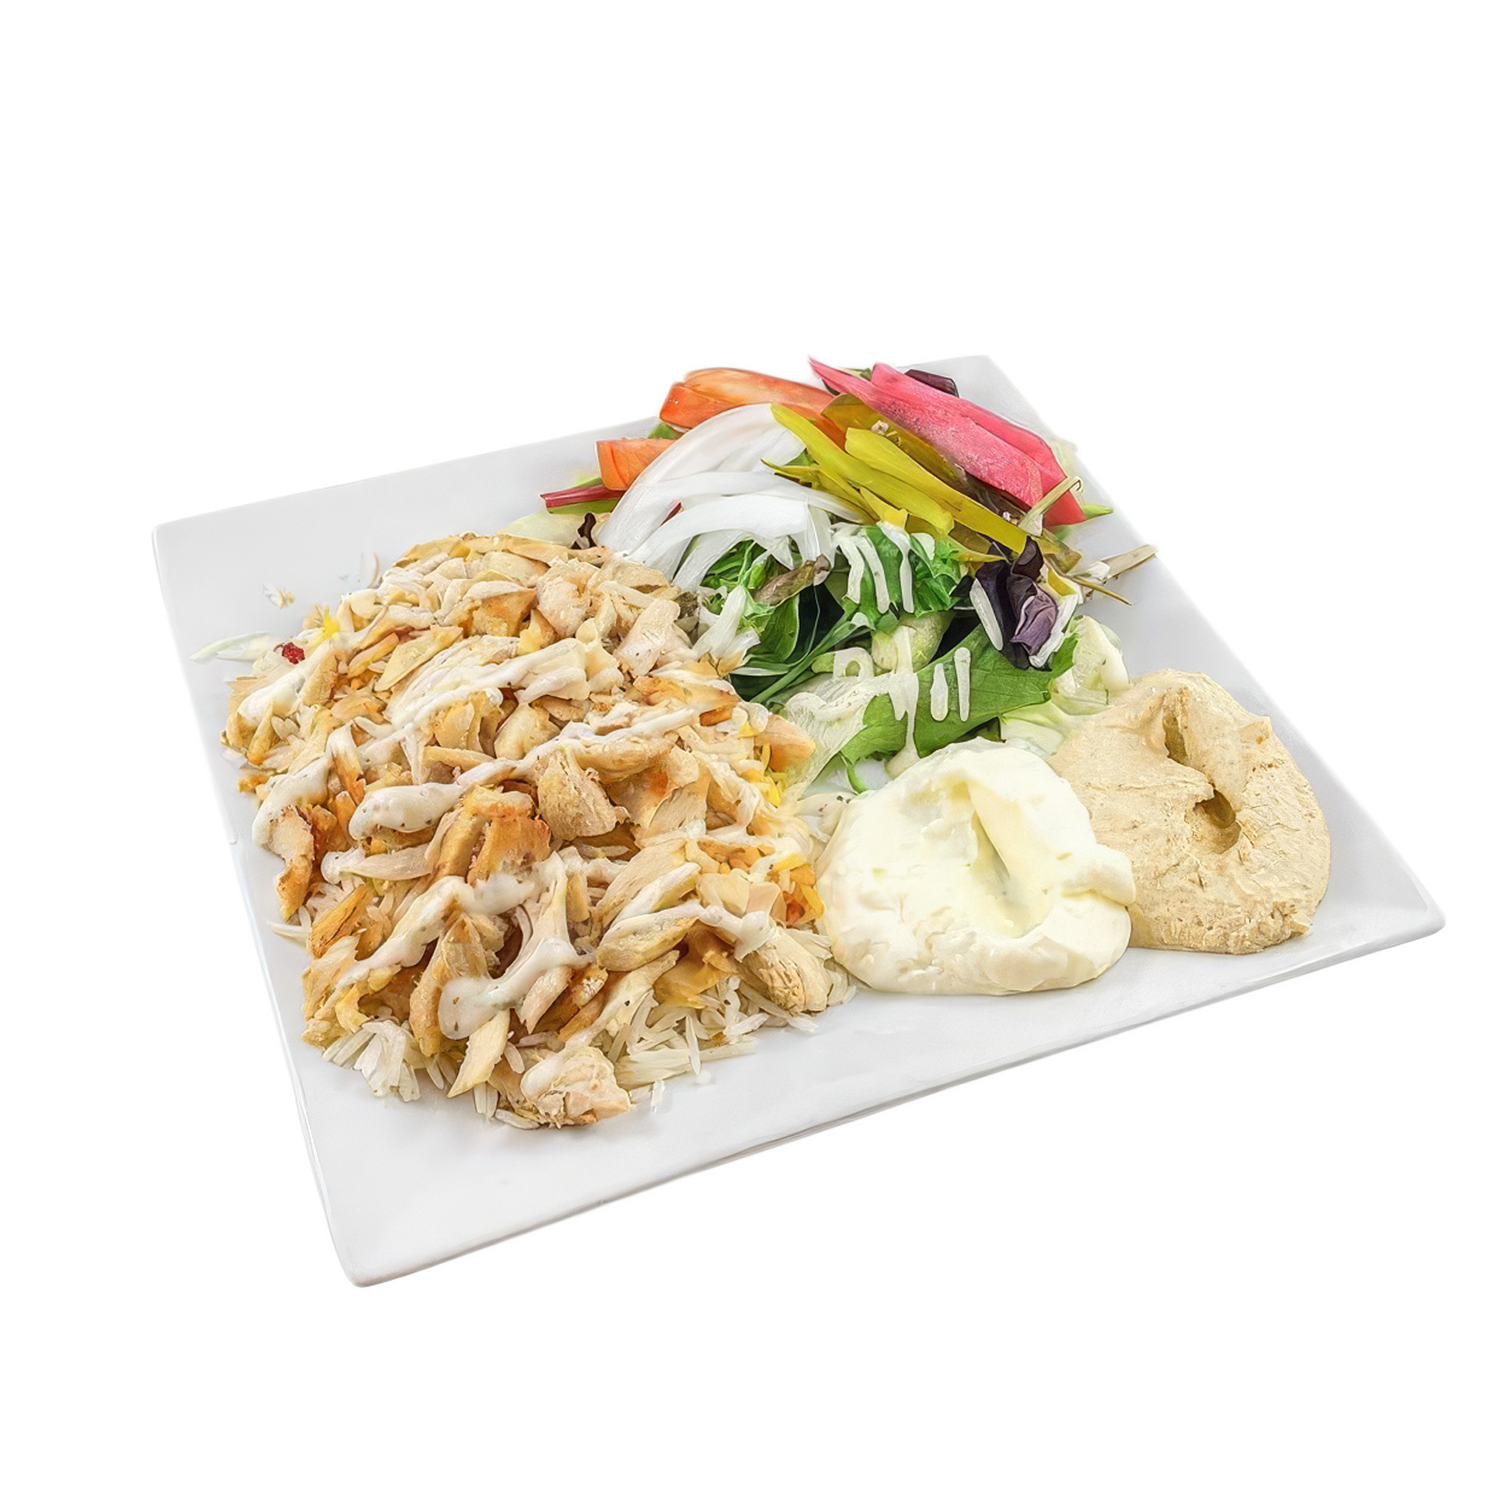 Chicken shawarma plate with rice, pita, and sides.